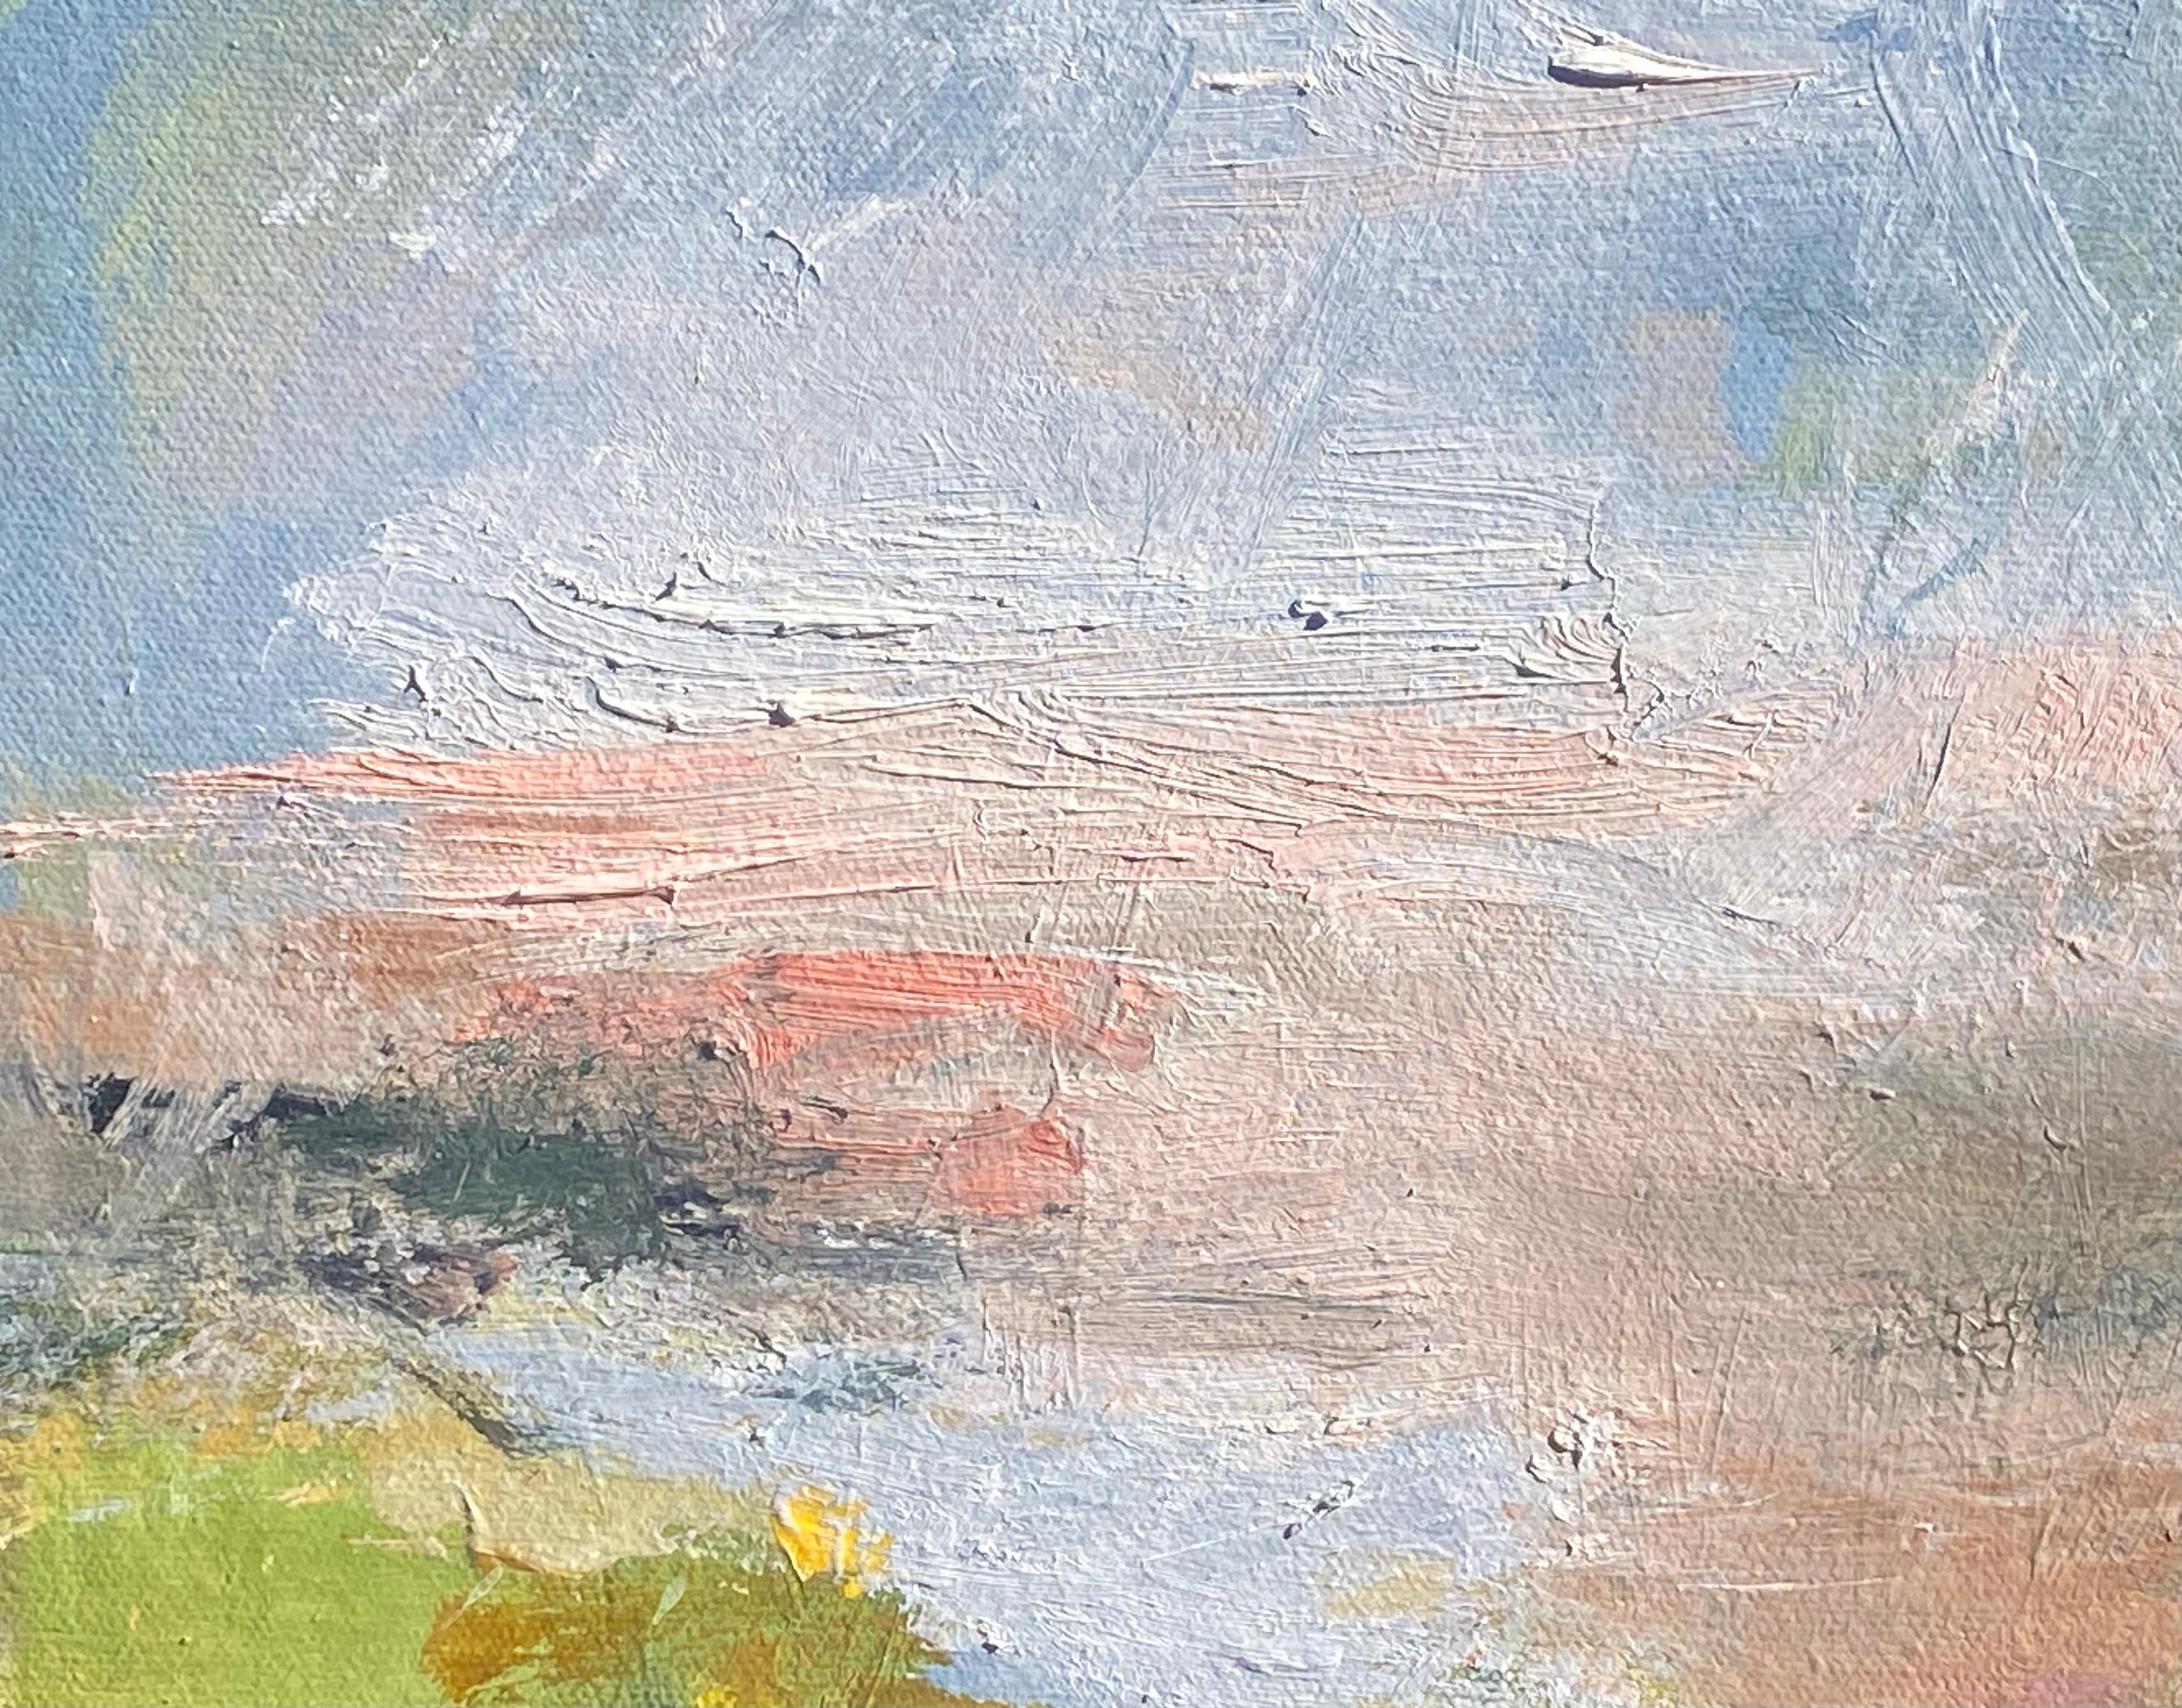 Original oil on canvas abstract painting by the American artist, Kathy Buist.  Signed, titled “Moving Mist” verso and dated 2023. Signed lower right by the artist. Condition is new.  Presently unframed. Framing options are available.

Like many